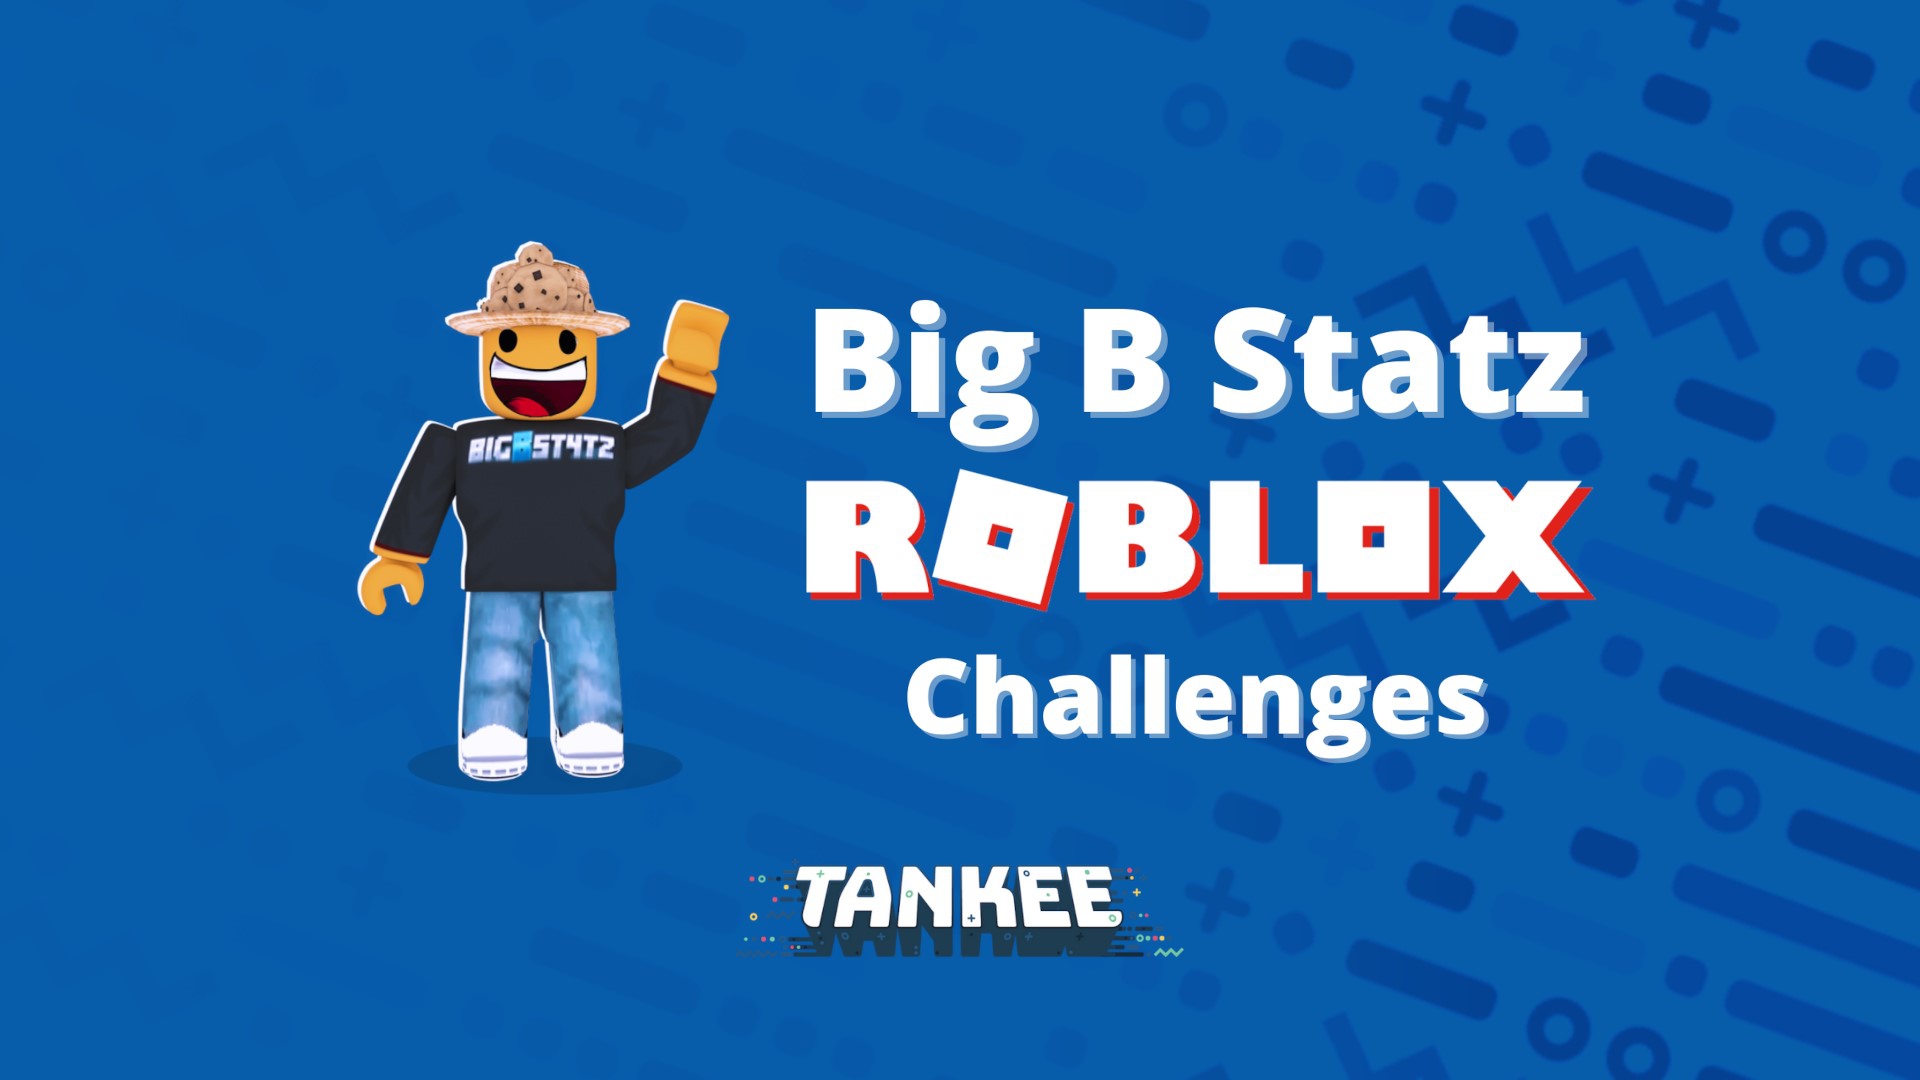 Bigb Roblox Challenges By Tankee Season 1 Episodes Streaming Online For Free The Roku Channel Roku - big b statz roblox natural disaster